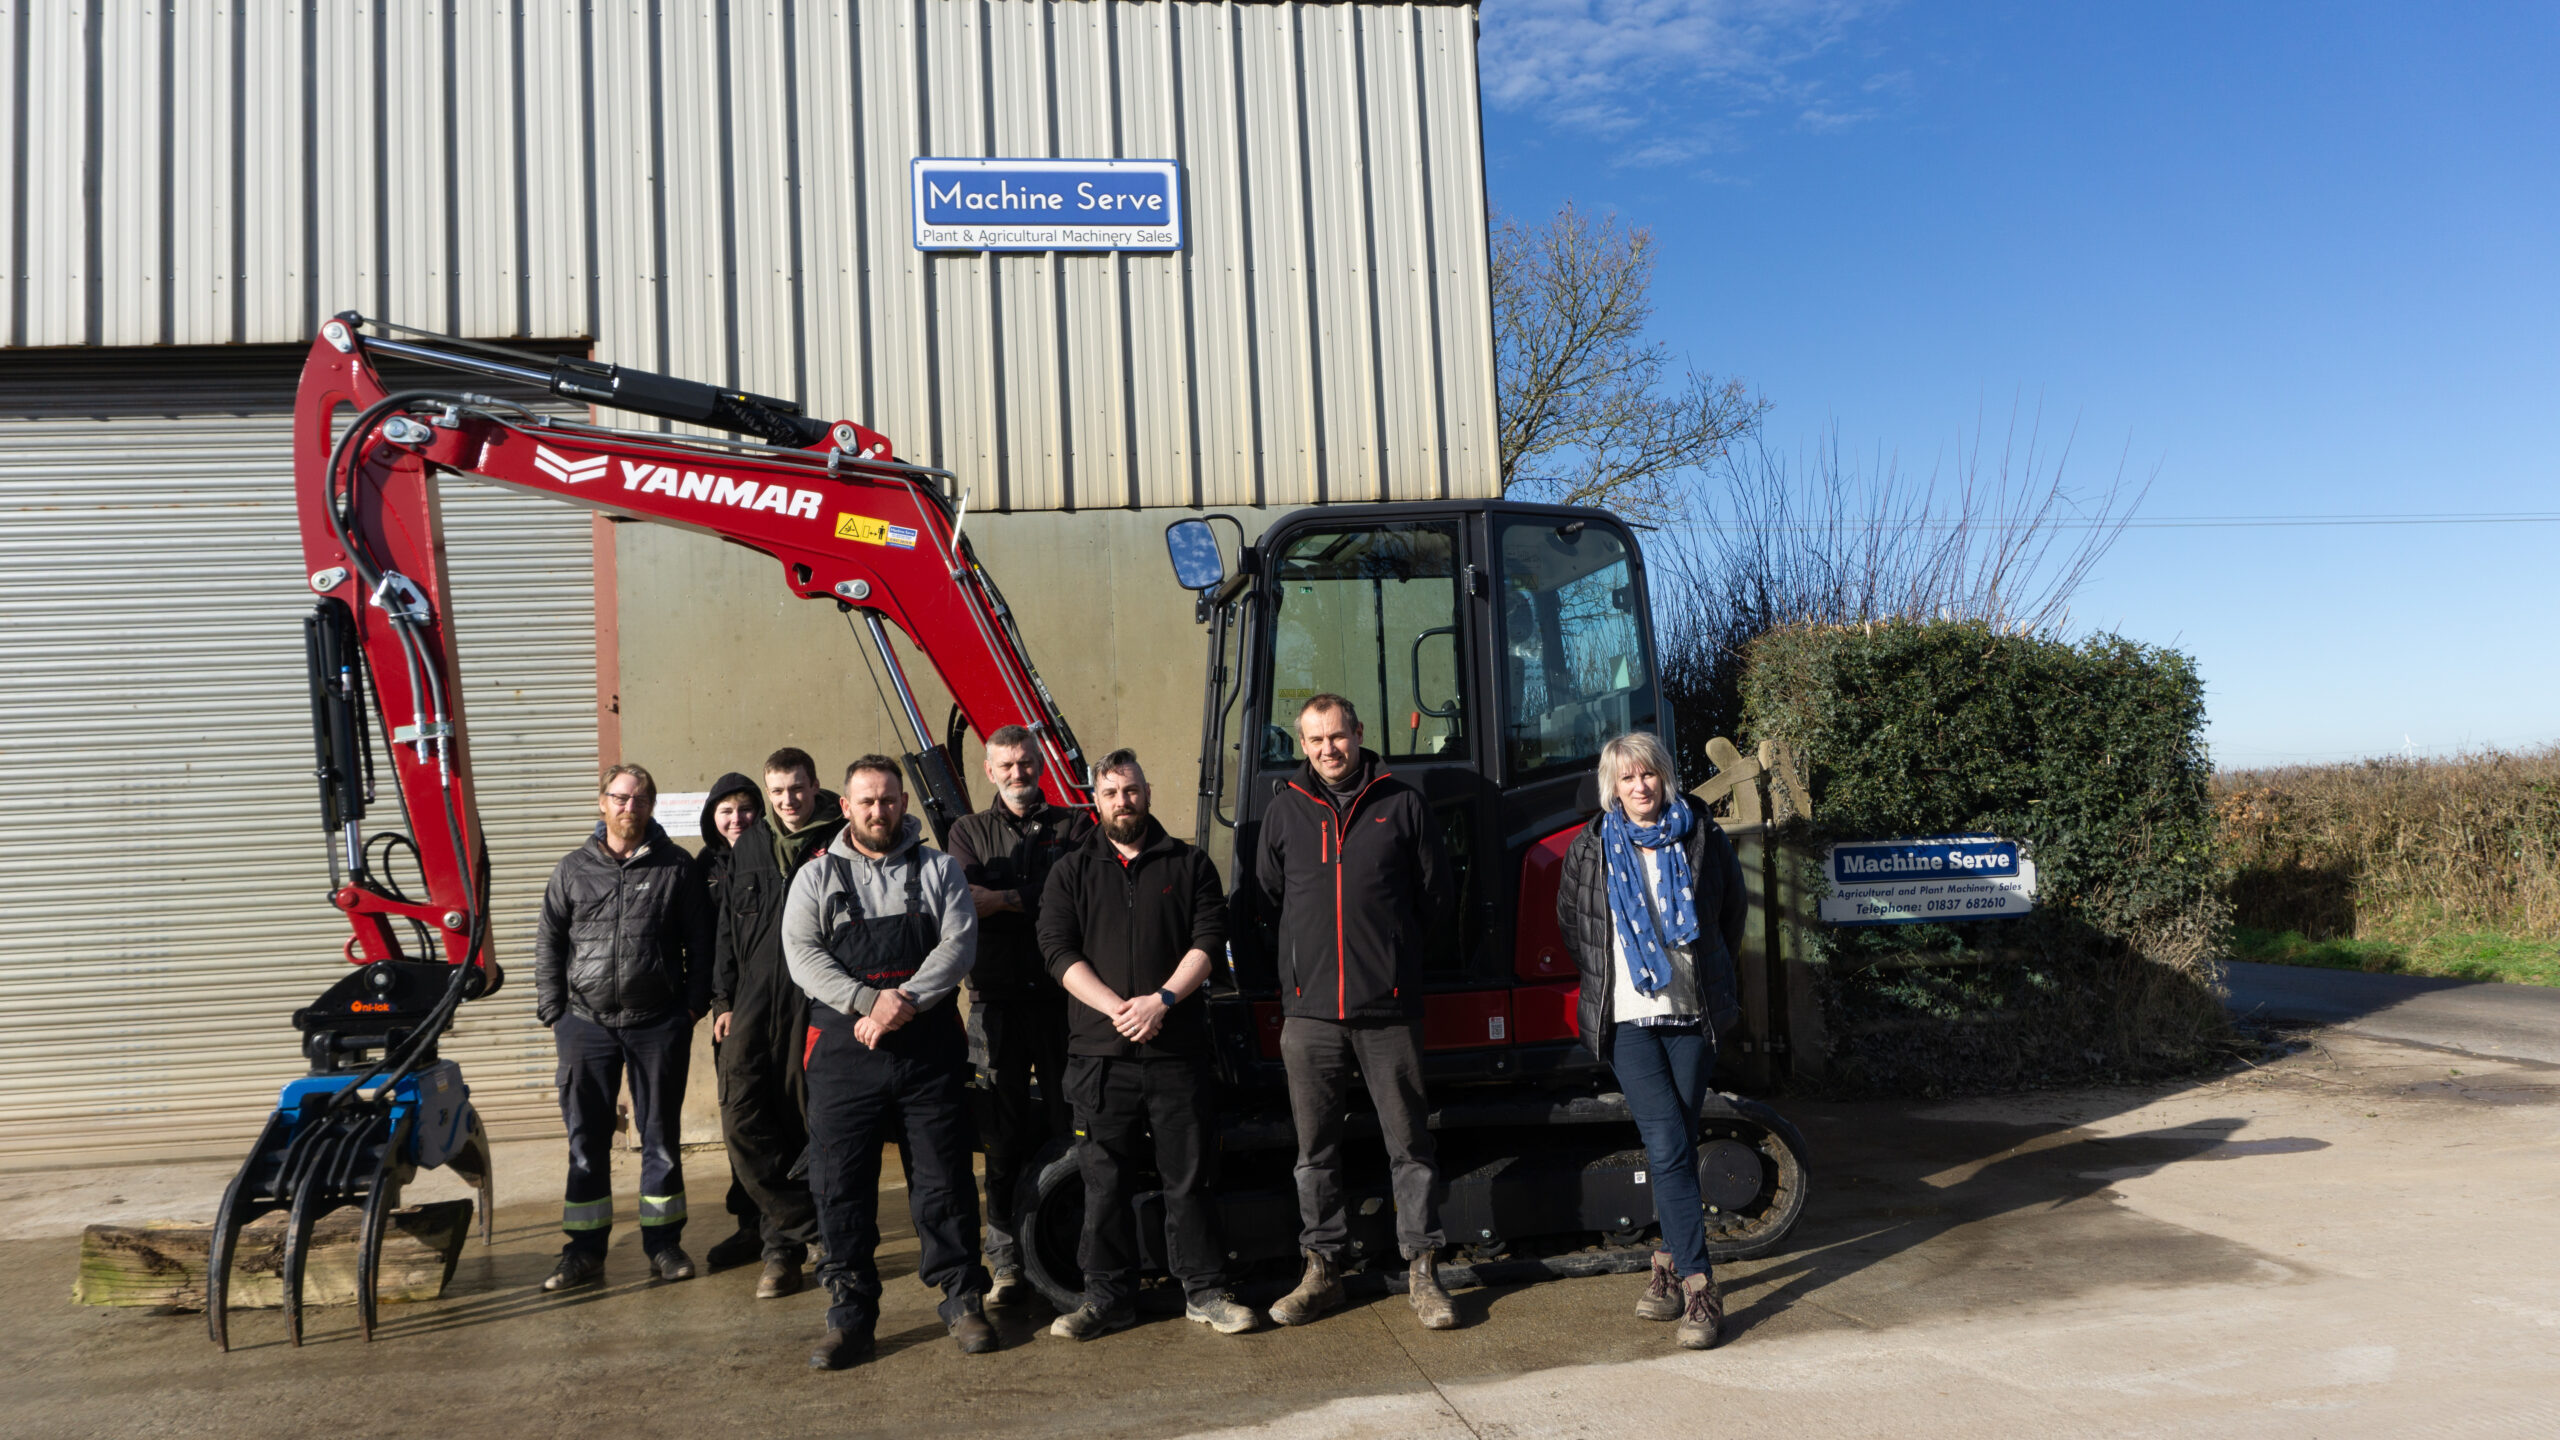 Yanmar CE EMEA dealer delivers customer excellence to the South-West